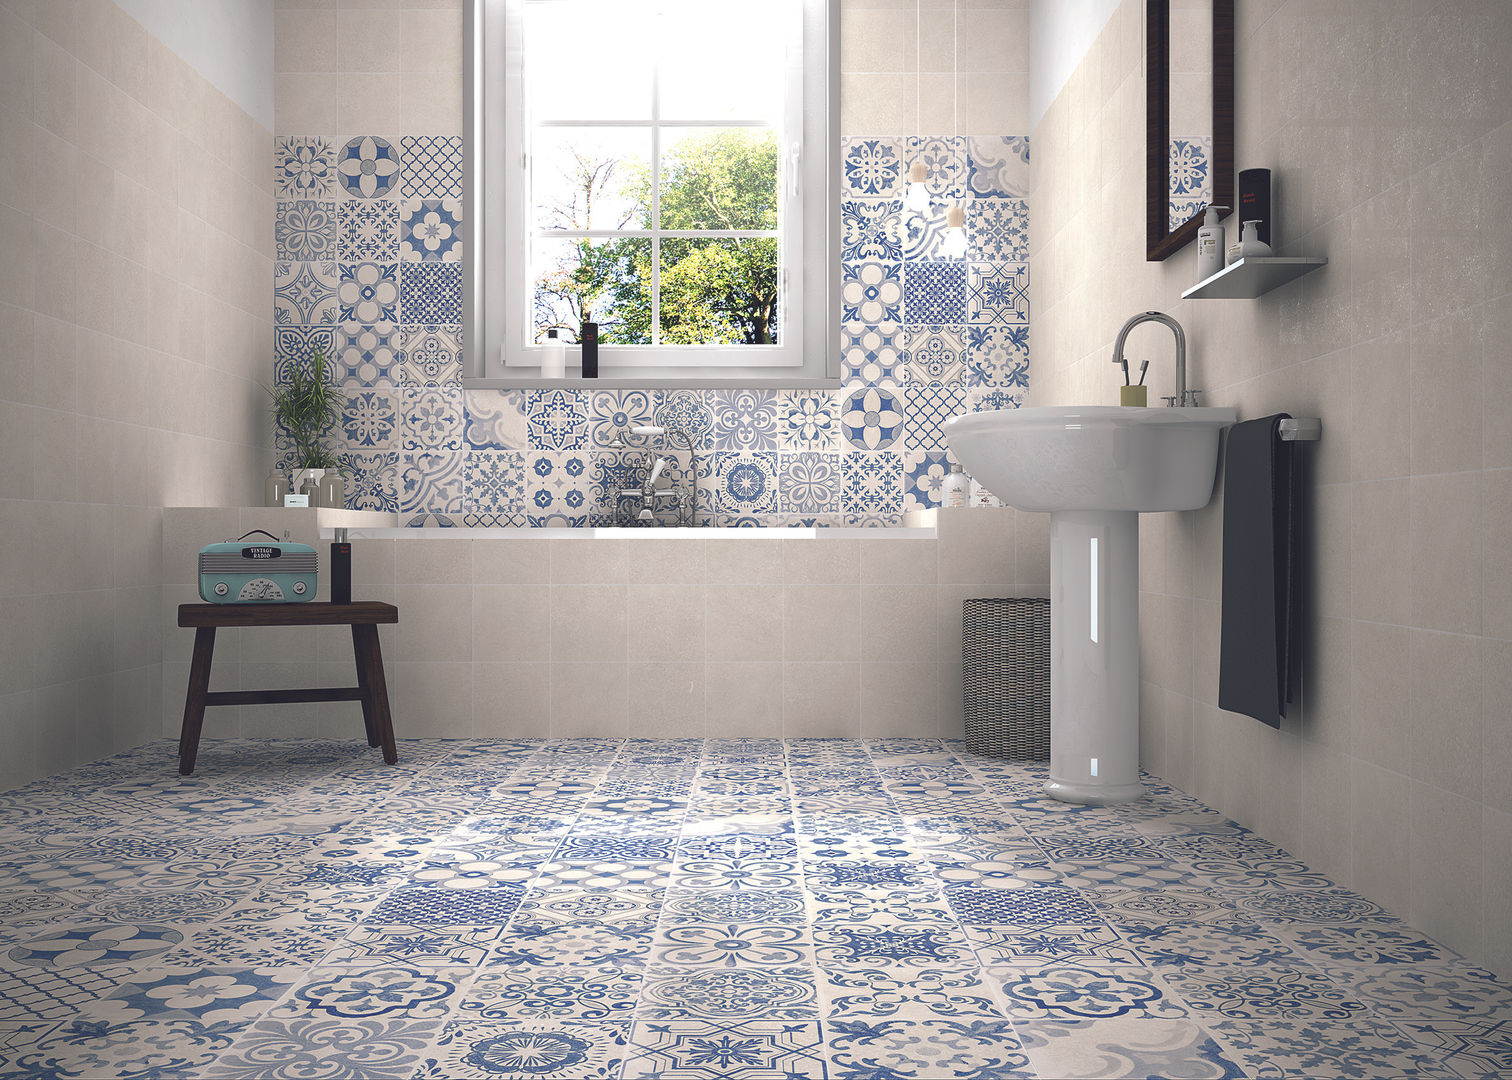 Skyros wall and floor tiles homify Country style walls & floors Tiles